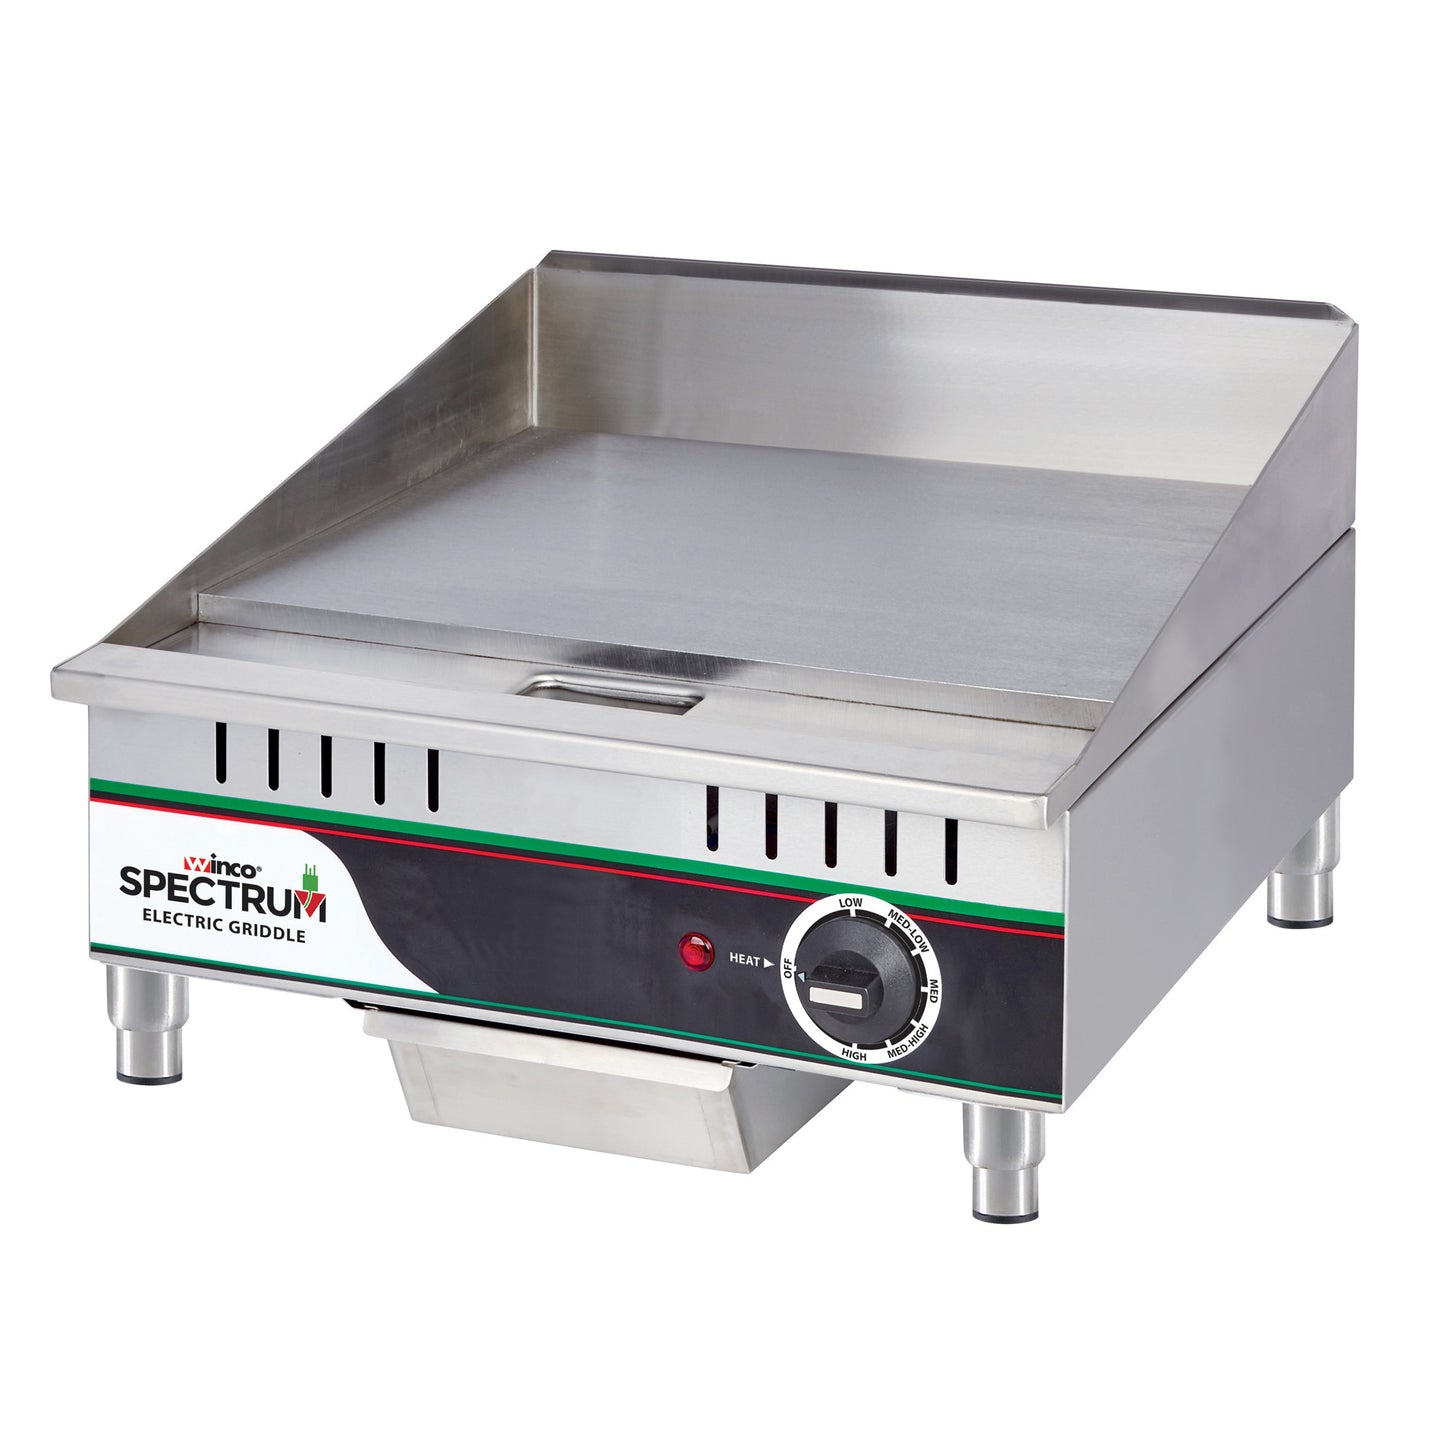 EGD-16M - Spectrum 16" Electric Griddle, One Heat Zone